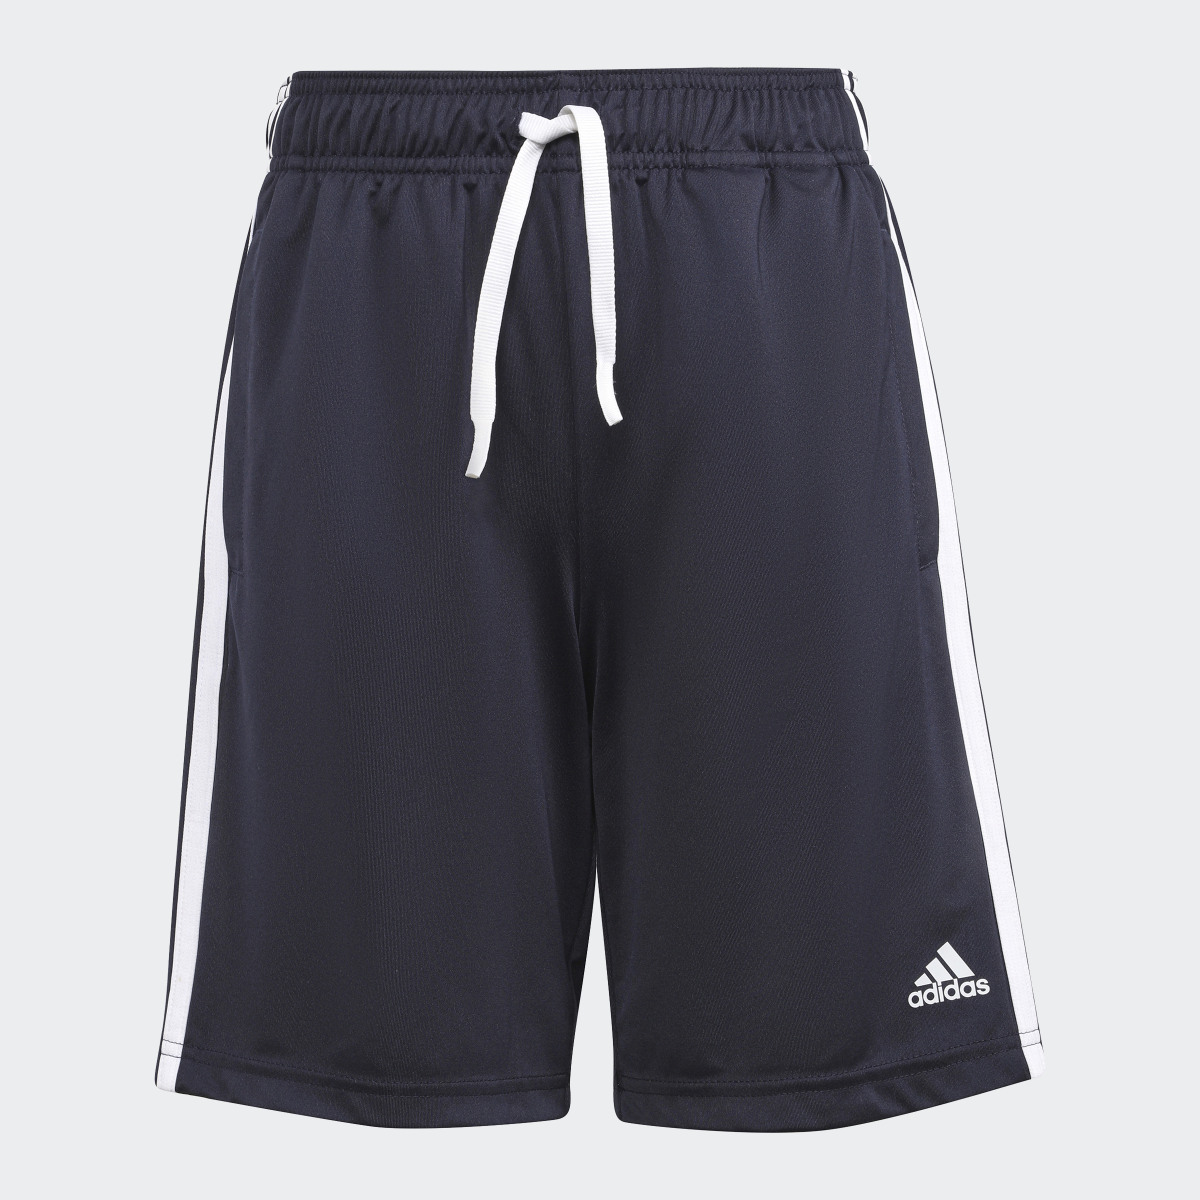 Adidas DESIGNED TO MOVE TEE AND SHORTS SET. 4